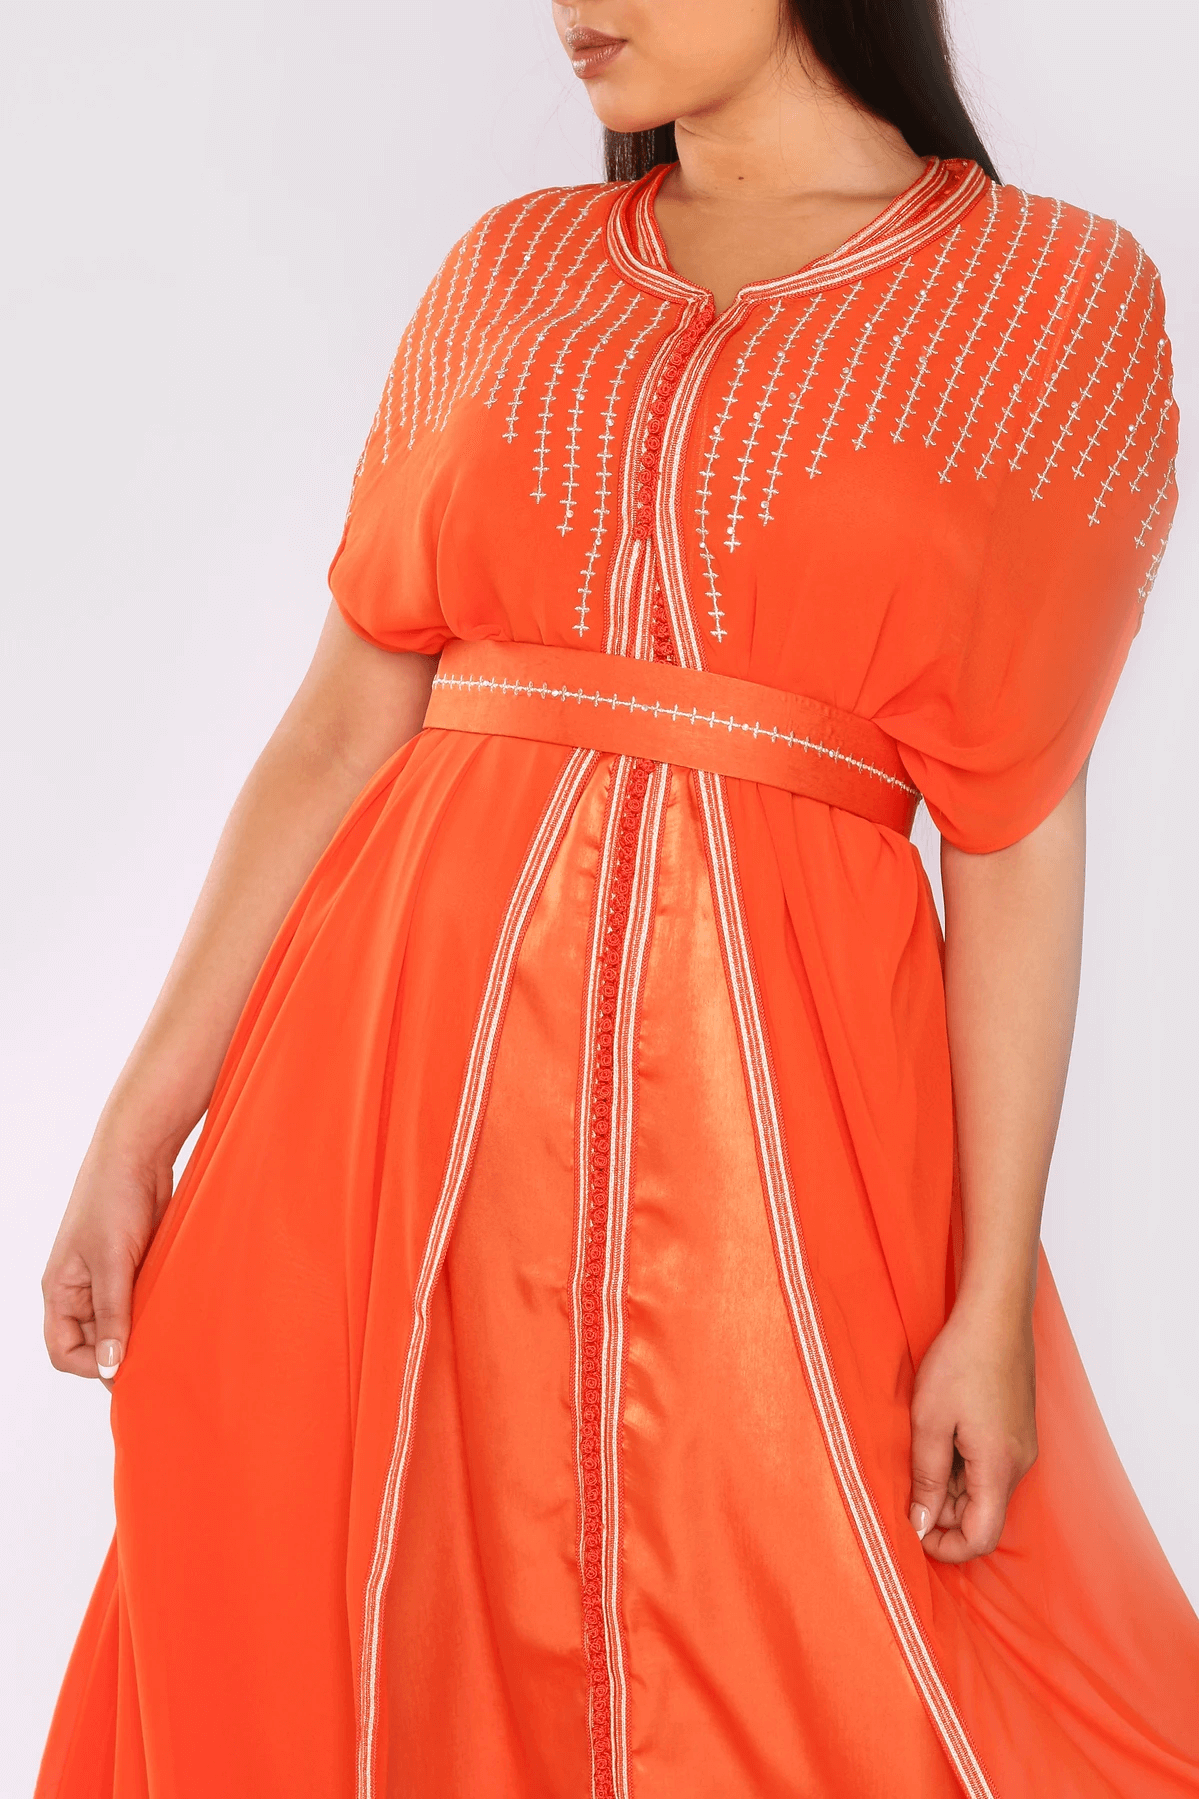 Lebssa Vanessa Short Sleeve Embroidered Long Occasion Wear Maxi Dress and Belt in Orange